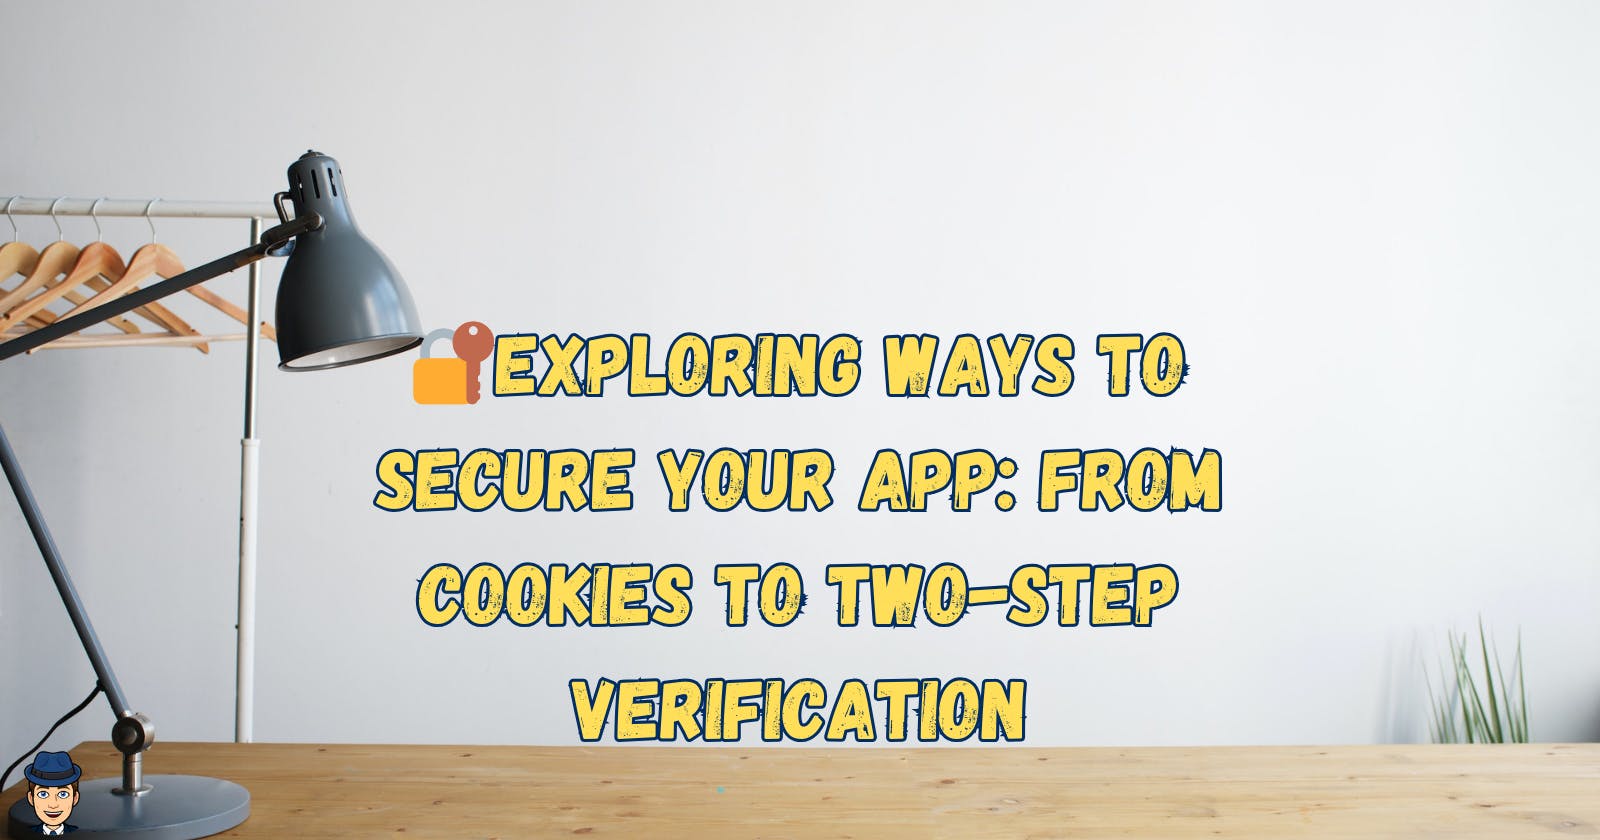 🔐Exploring Ways to Secure Your App: From Cookies to Two-Step Verification